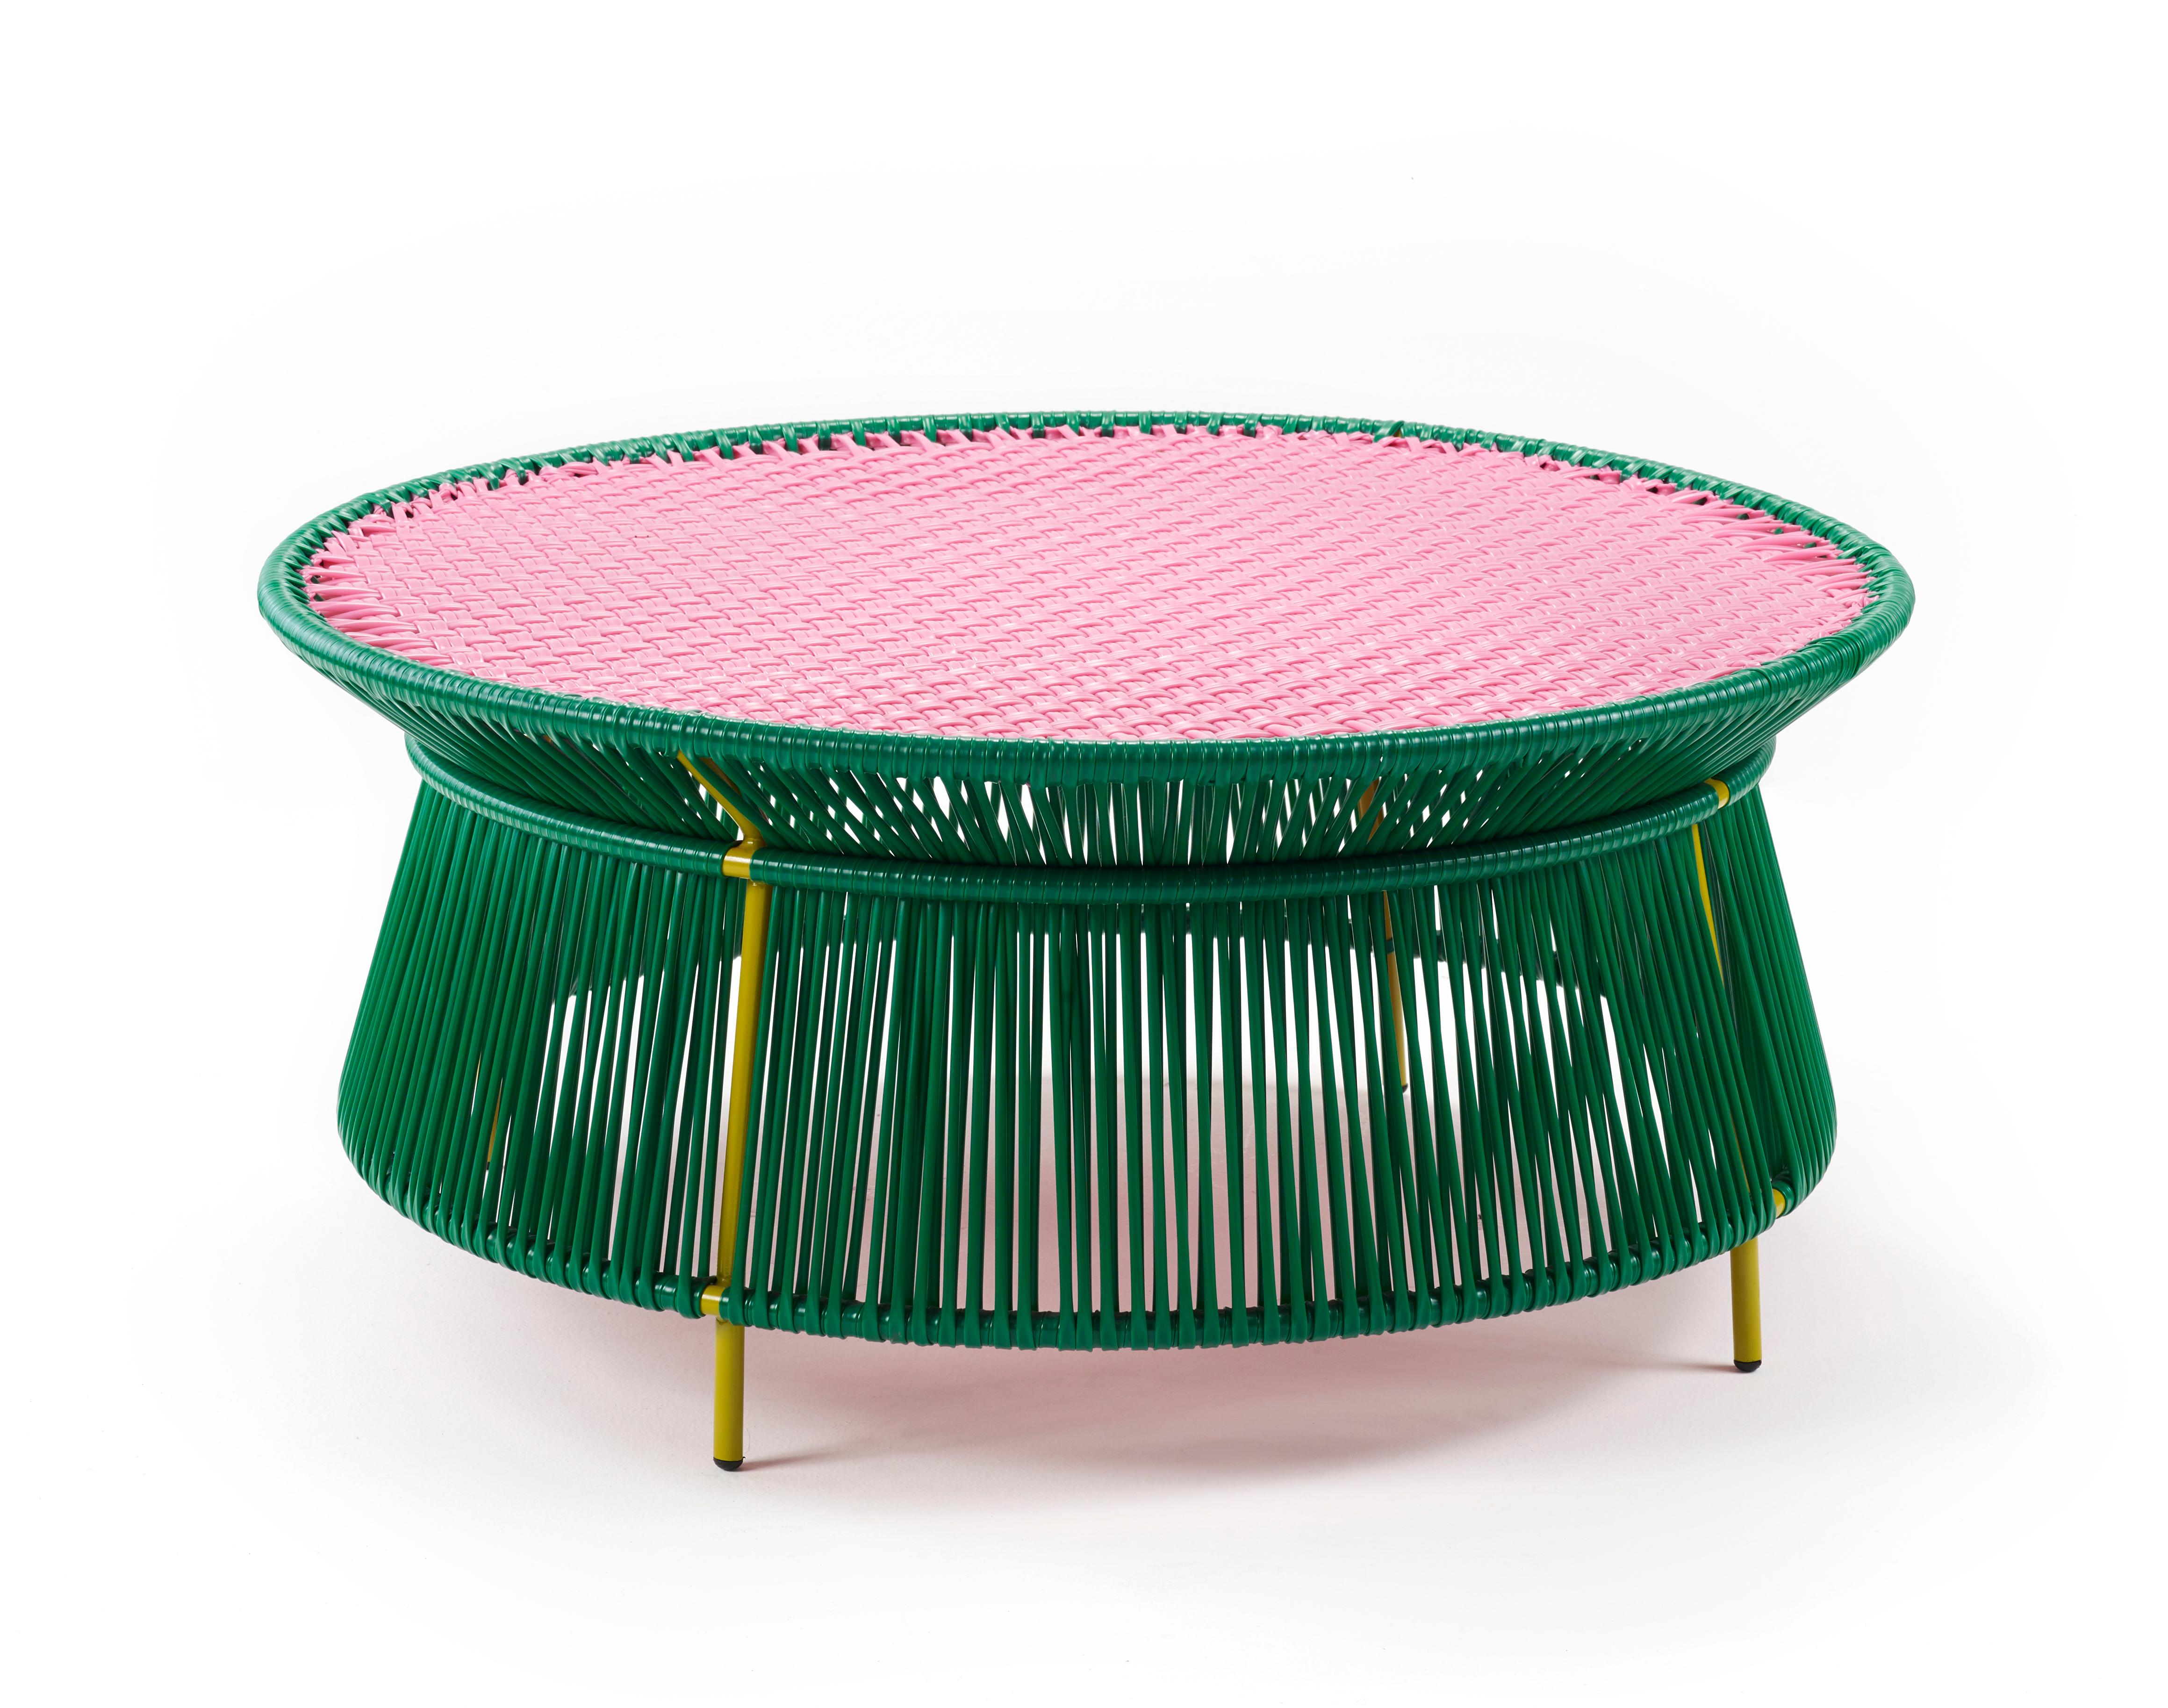 Green Caribe Low table by Sebastian Herkner
Materials: Galvanized and powder-coated tubular steel. PVC strings are made from recycled plastic.
Technique: Made from recycled plastic and weaved by local craftspeople in Colombia. 
Dimensions: